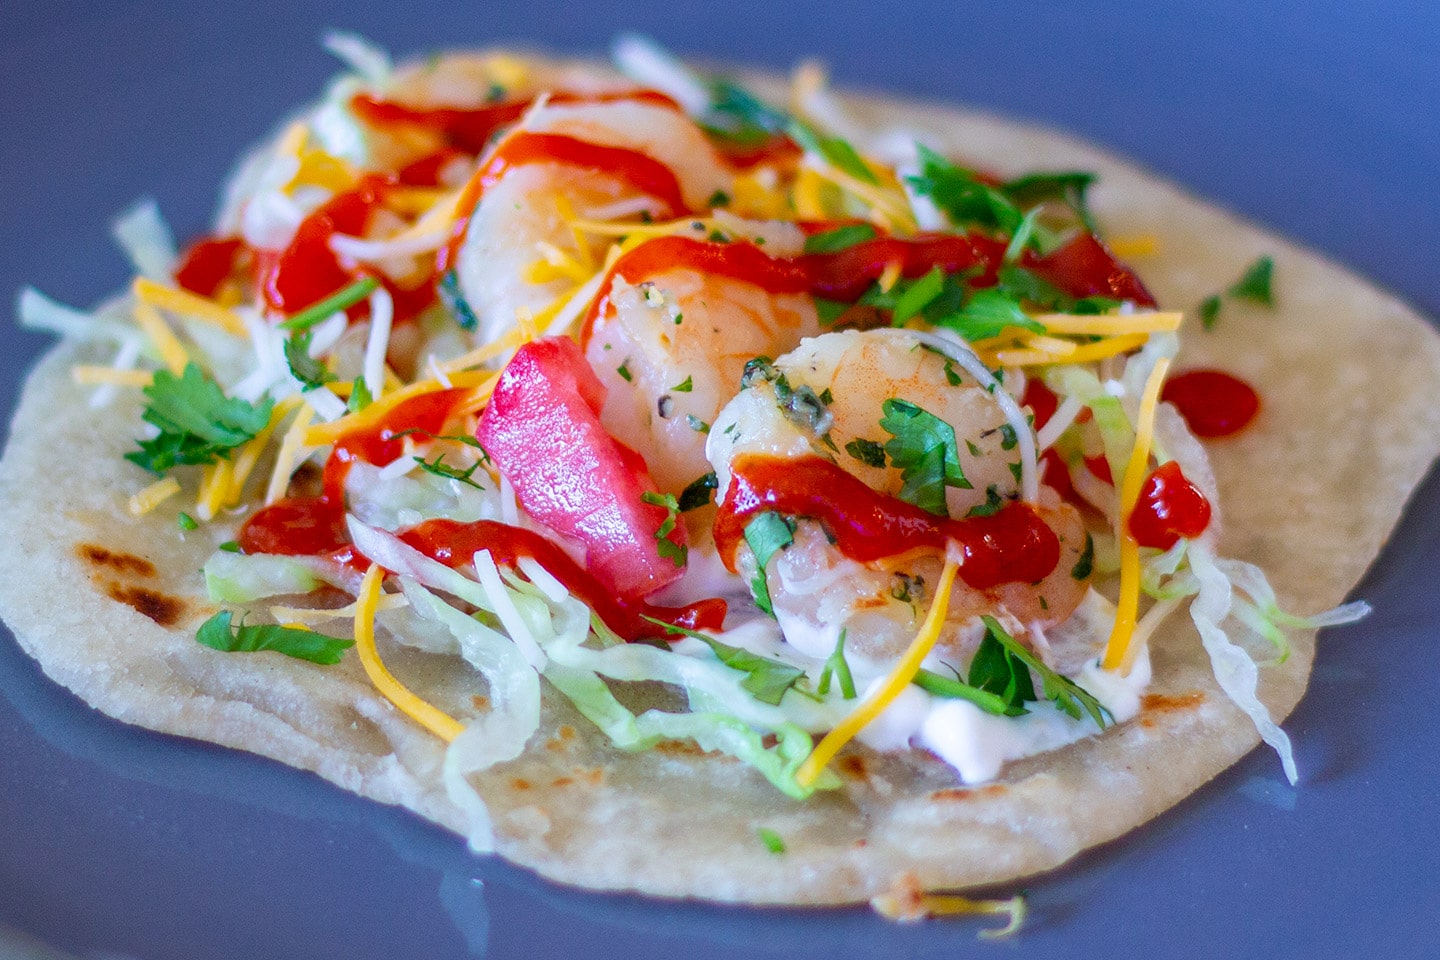 Dad's easy shrimp taco recipe assembled on a plate